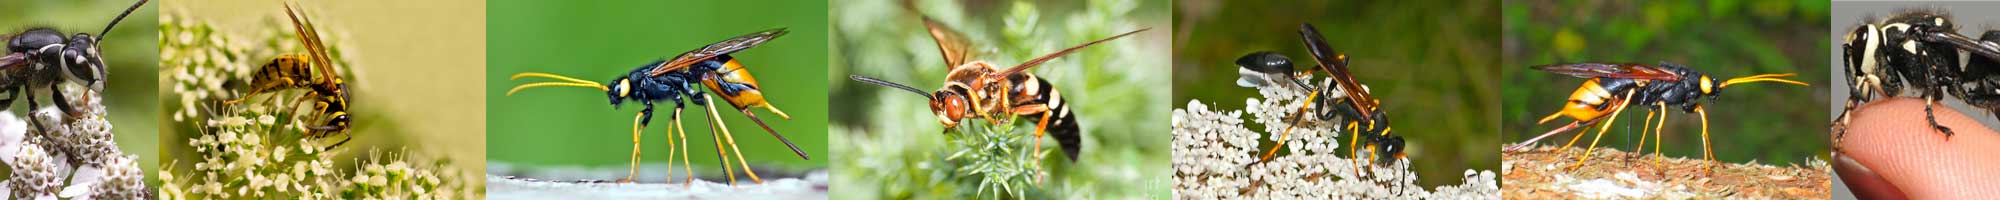 Wasp and hornet control